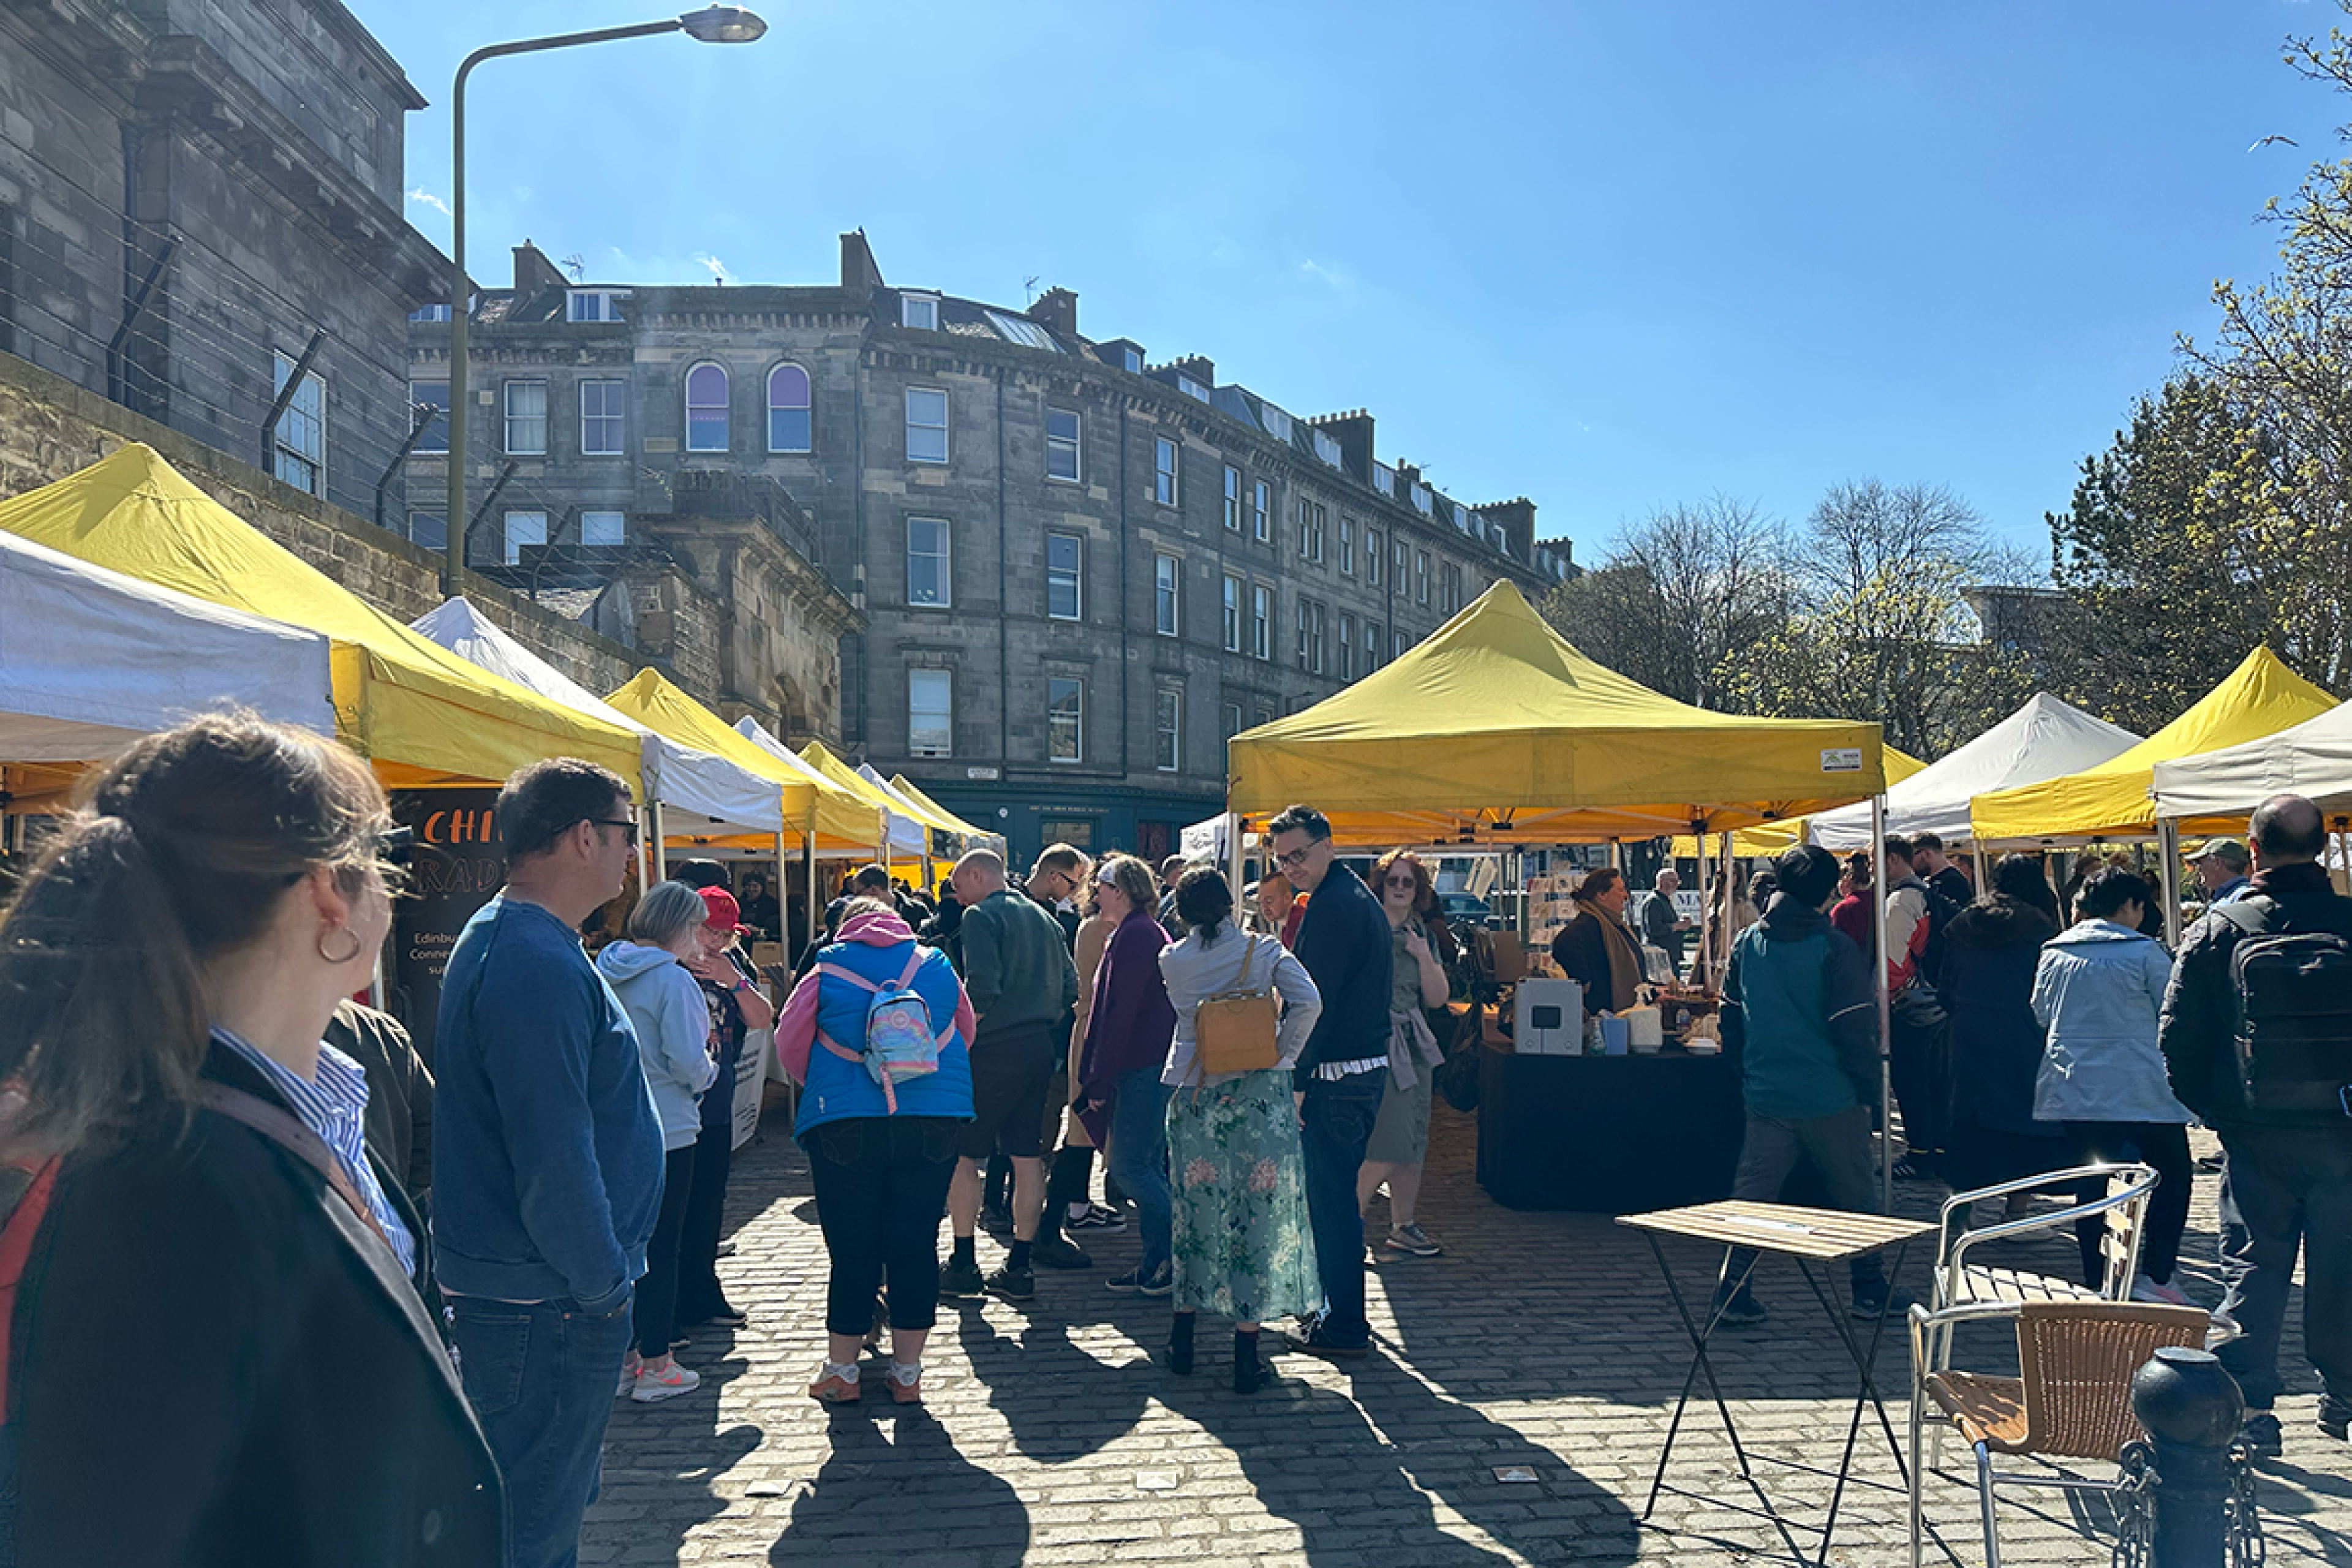 Leith Market Stalls and people walking around